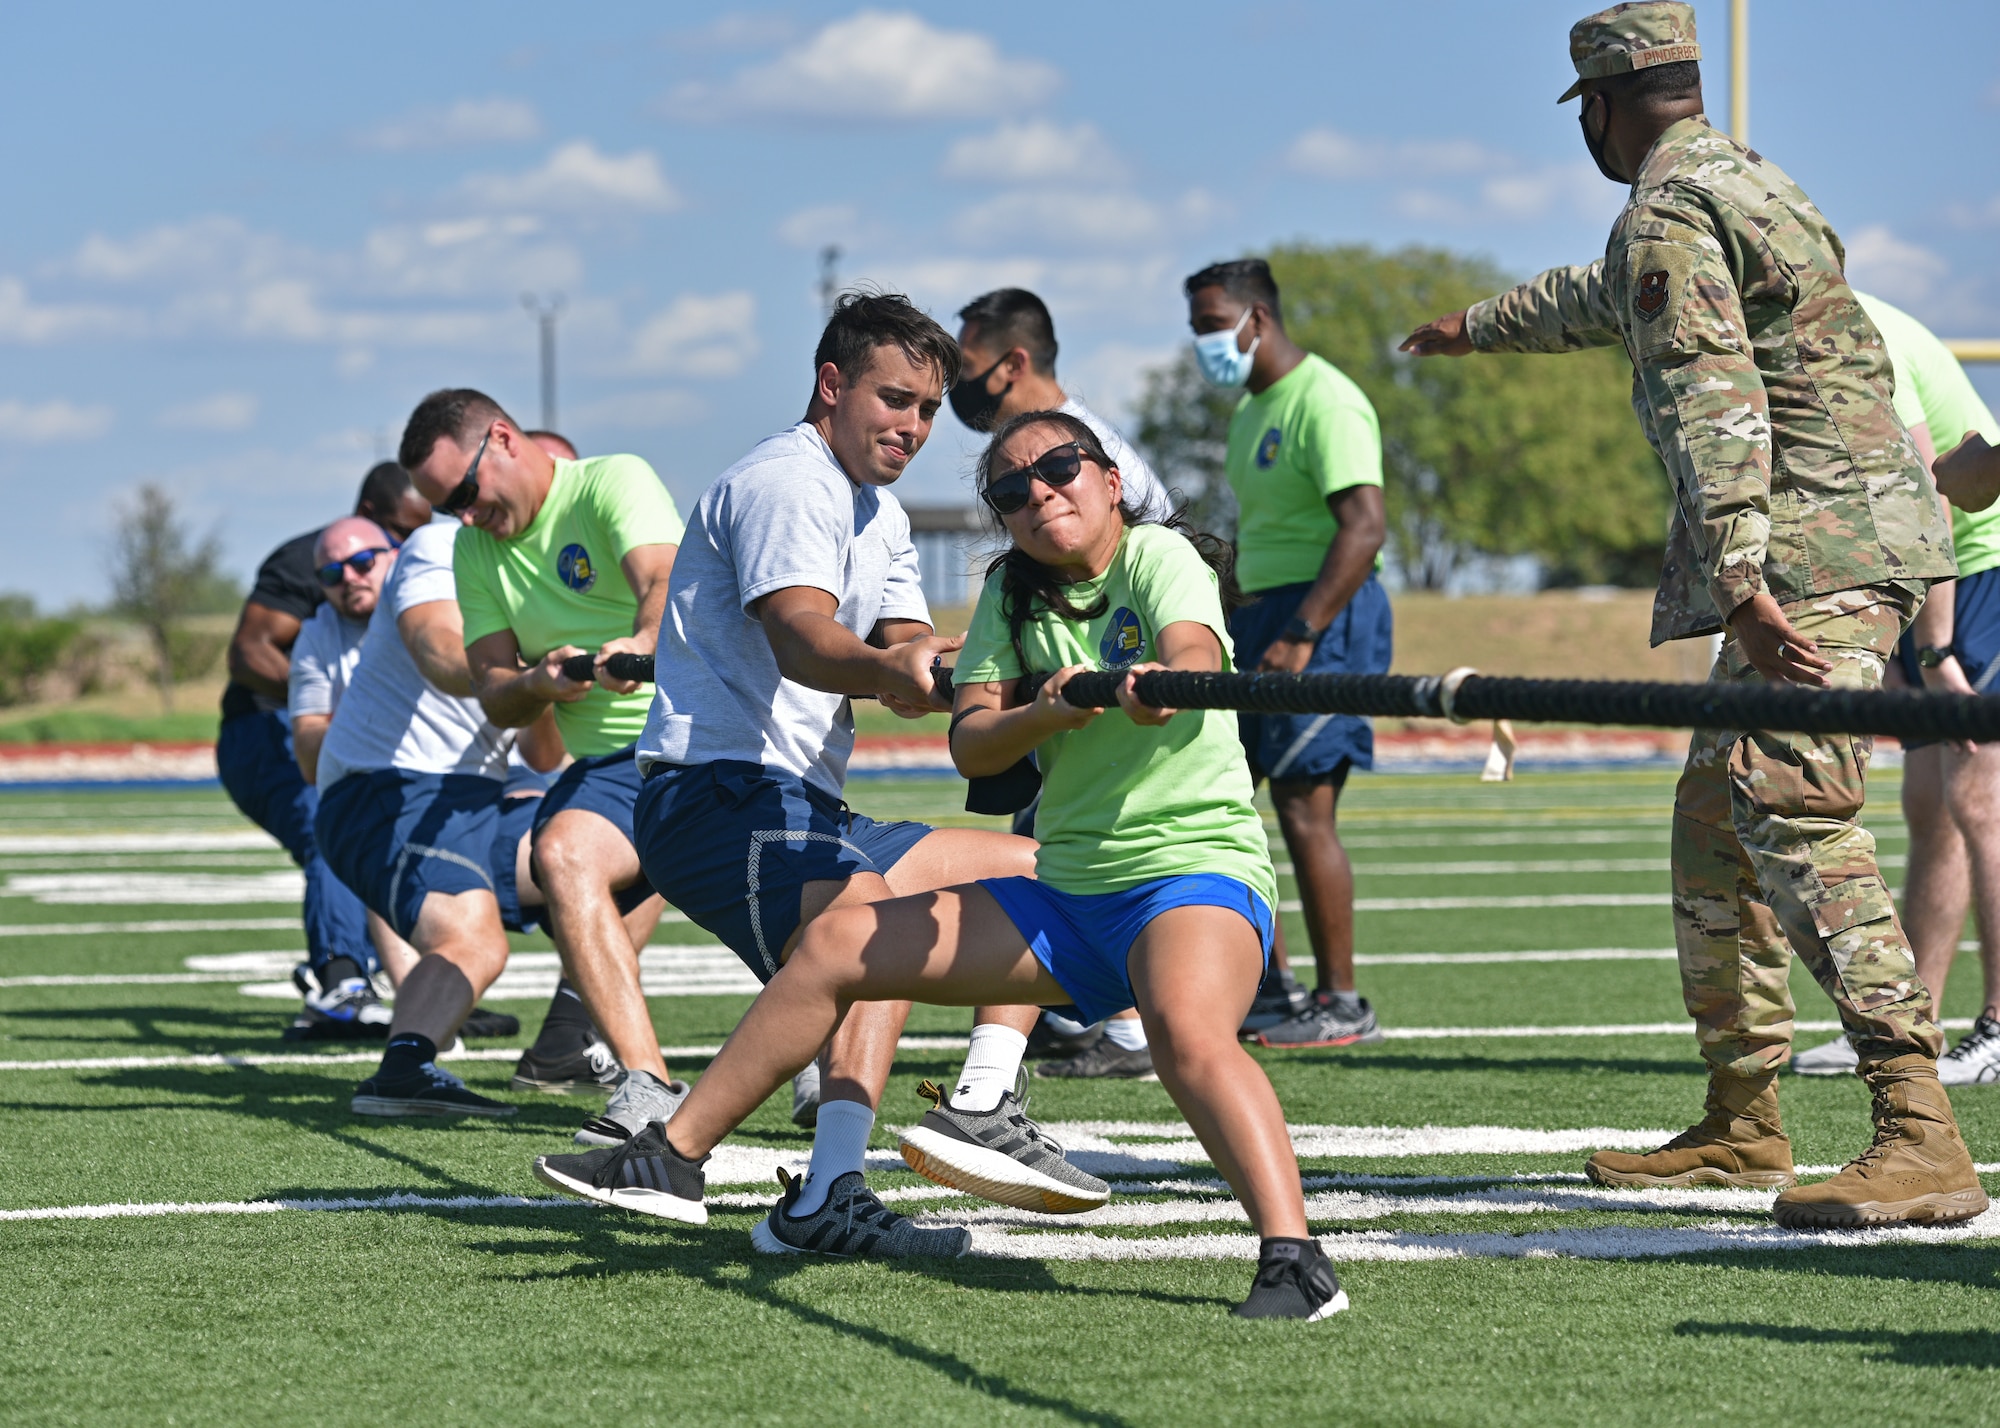 Members from the 17th Contracting Squadron participate in a tug-of-war competition during Wing Sports Day on Goodfellow Air Force Base, Texas, Sept. 17, 2021. Teams worked together to pull the marker on the rope across the line as quickly as possible. (U.S. Air Force photo by Senior Airman Ashley Thrash)